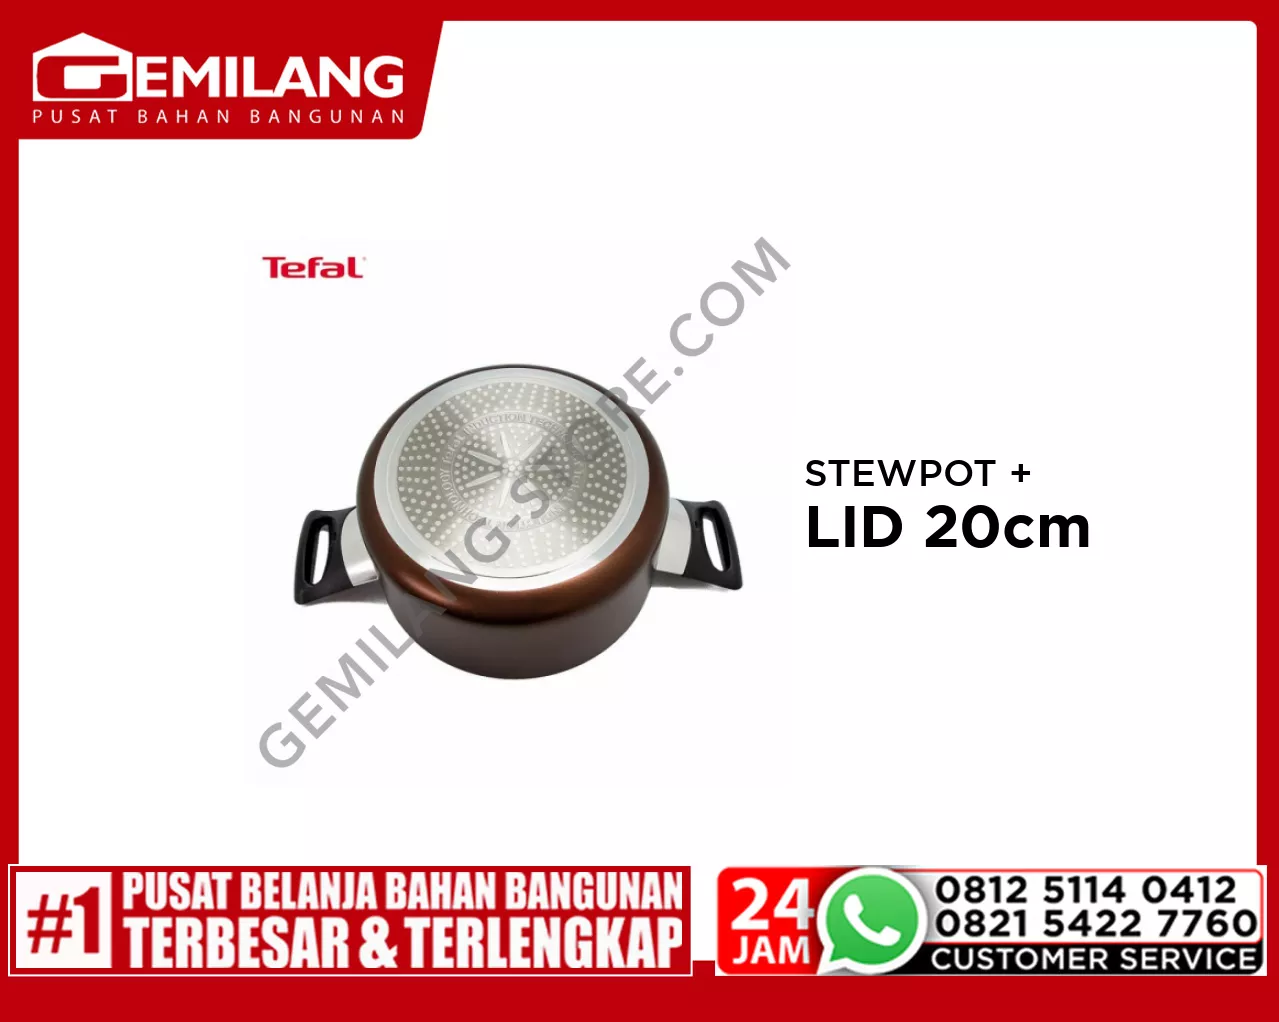 TEFAL DAY BY DAY STEWPOT + LID 20cm